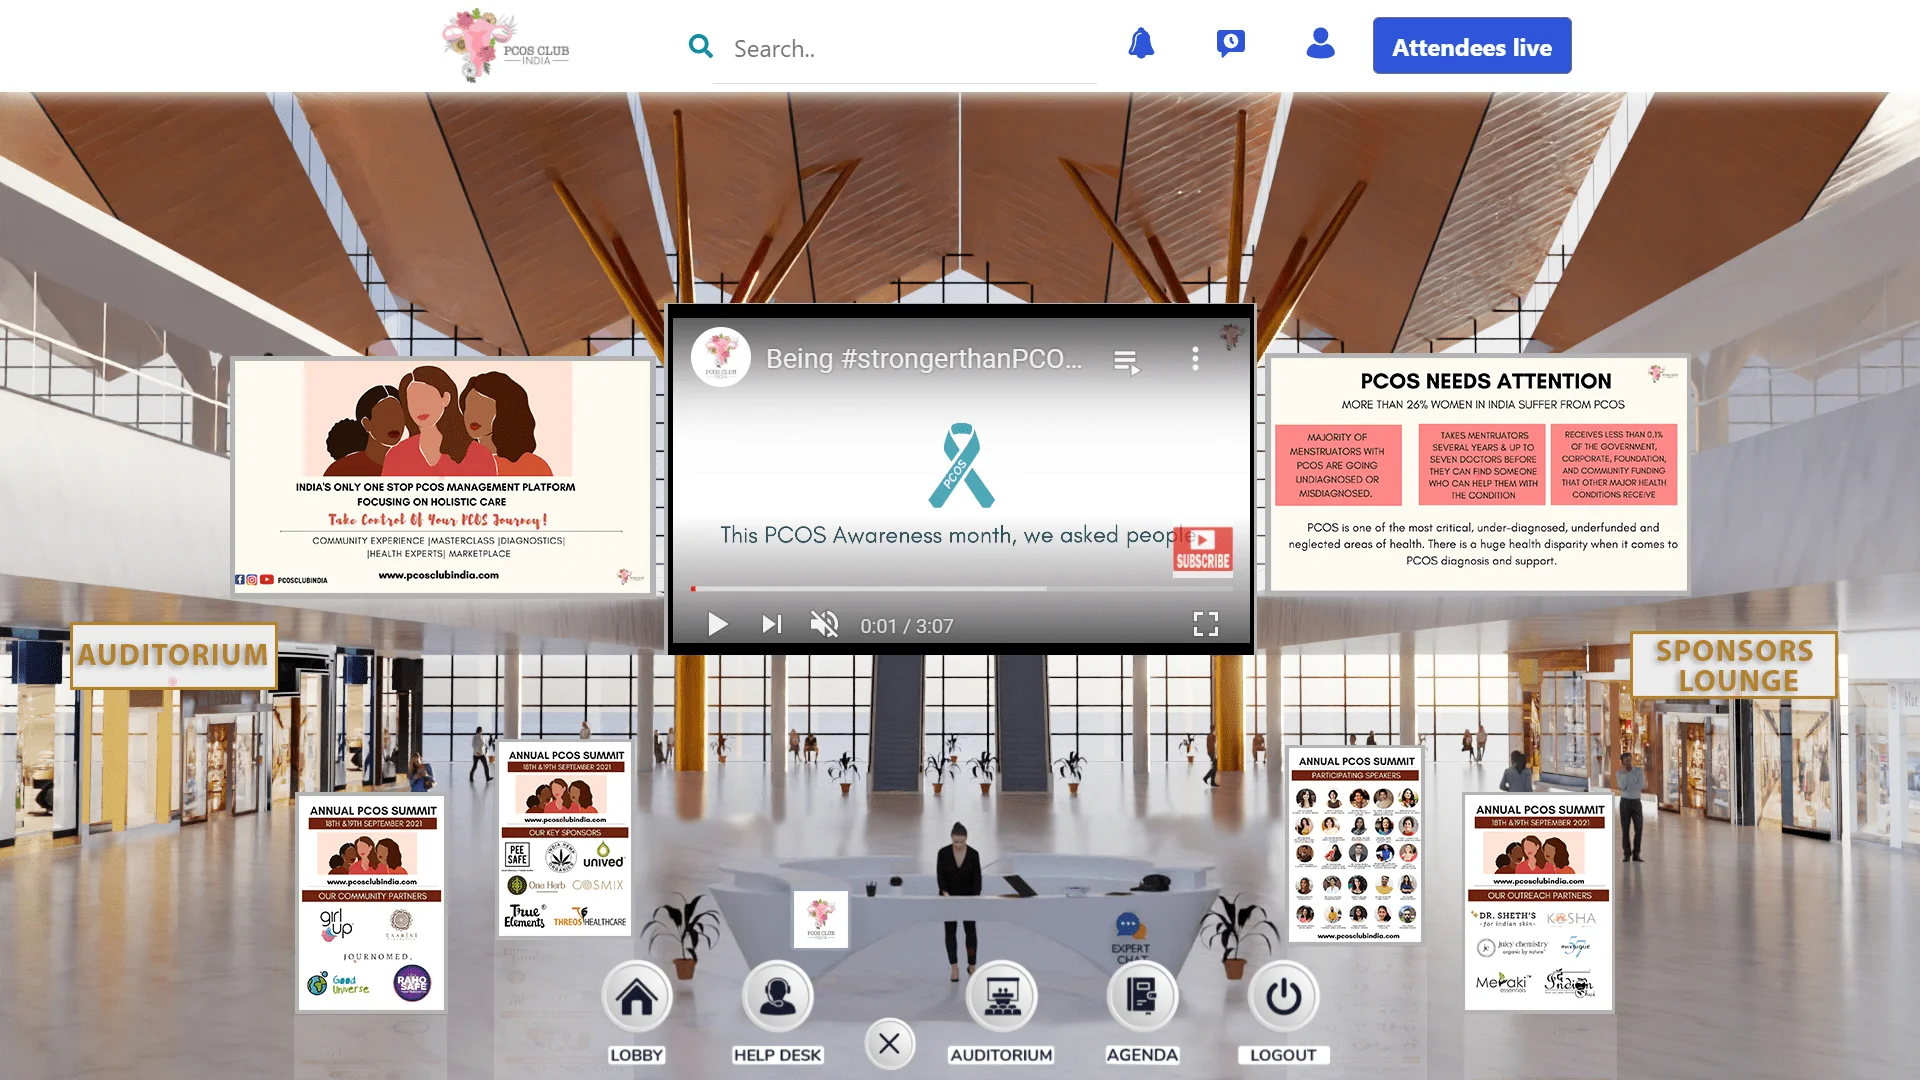 pcos virtual summit welcome lobby